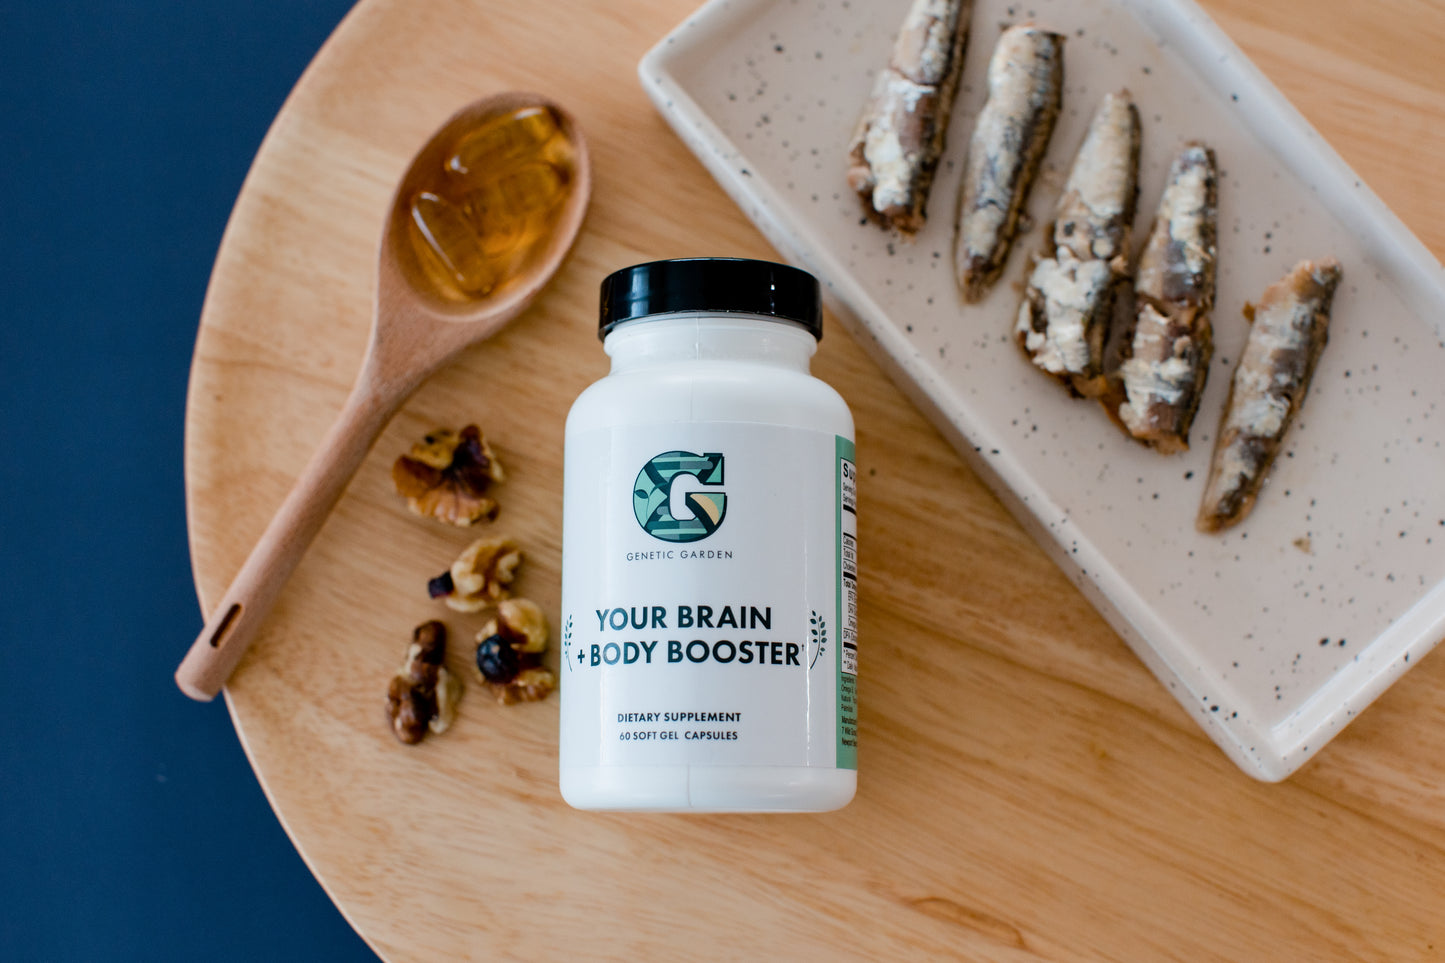 Your Brain + Body Booster